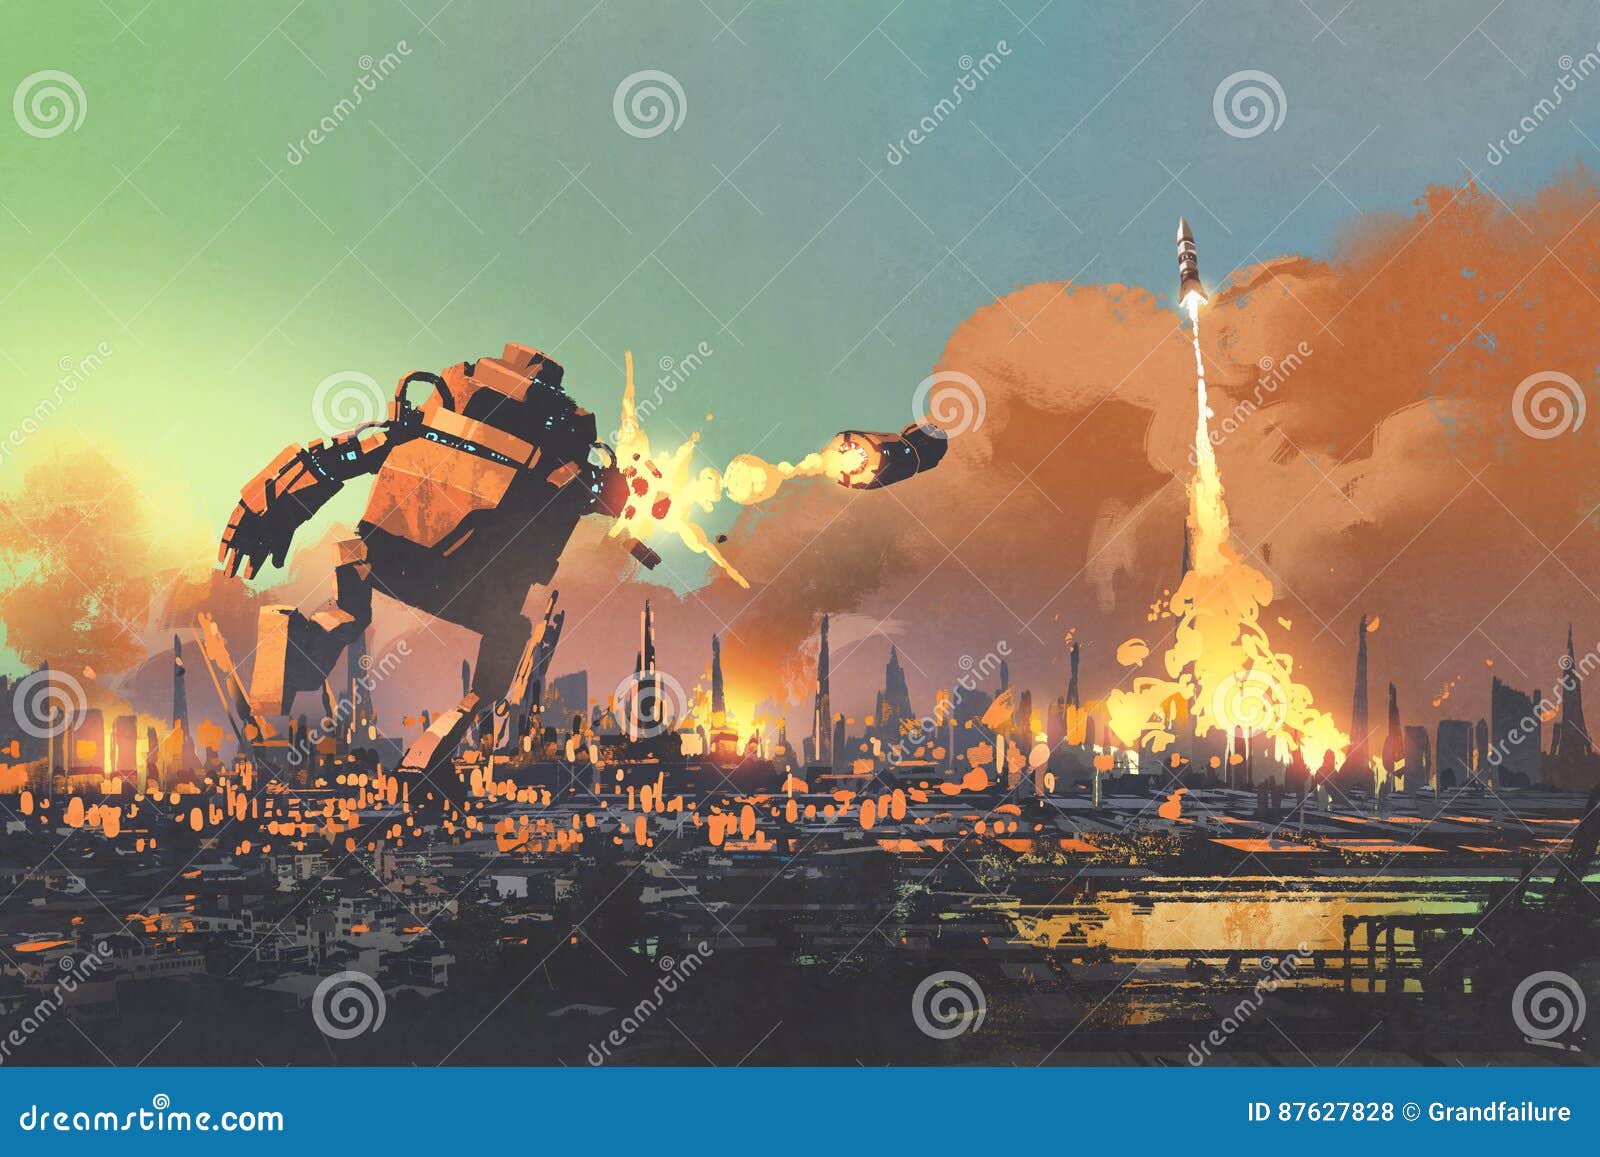 the giant robot launching rocket punch destroy the city